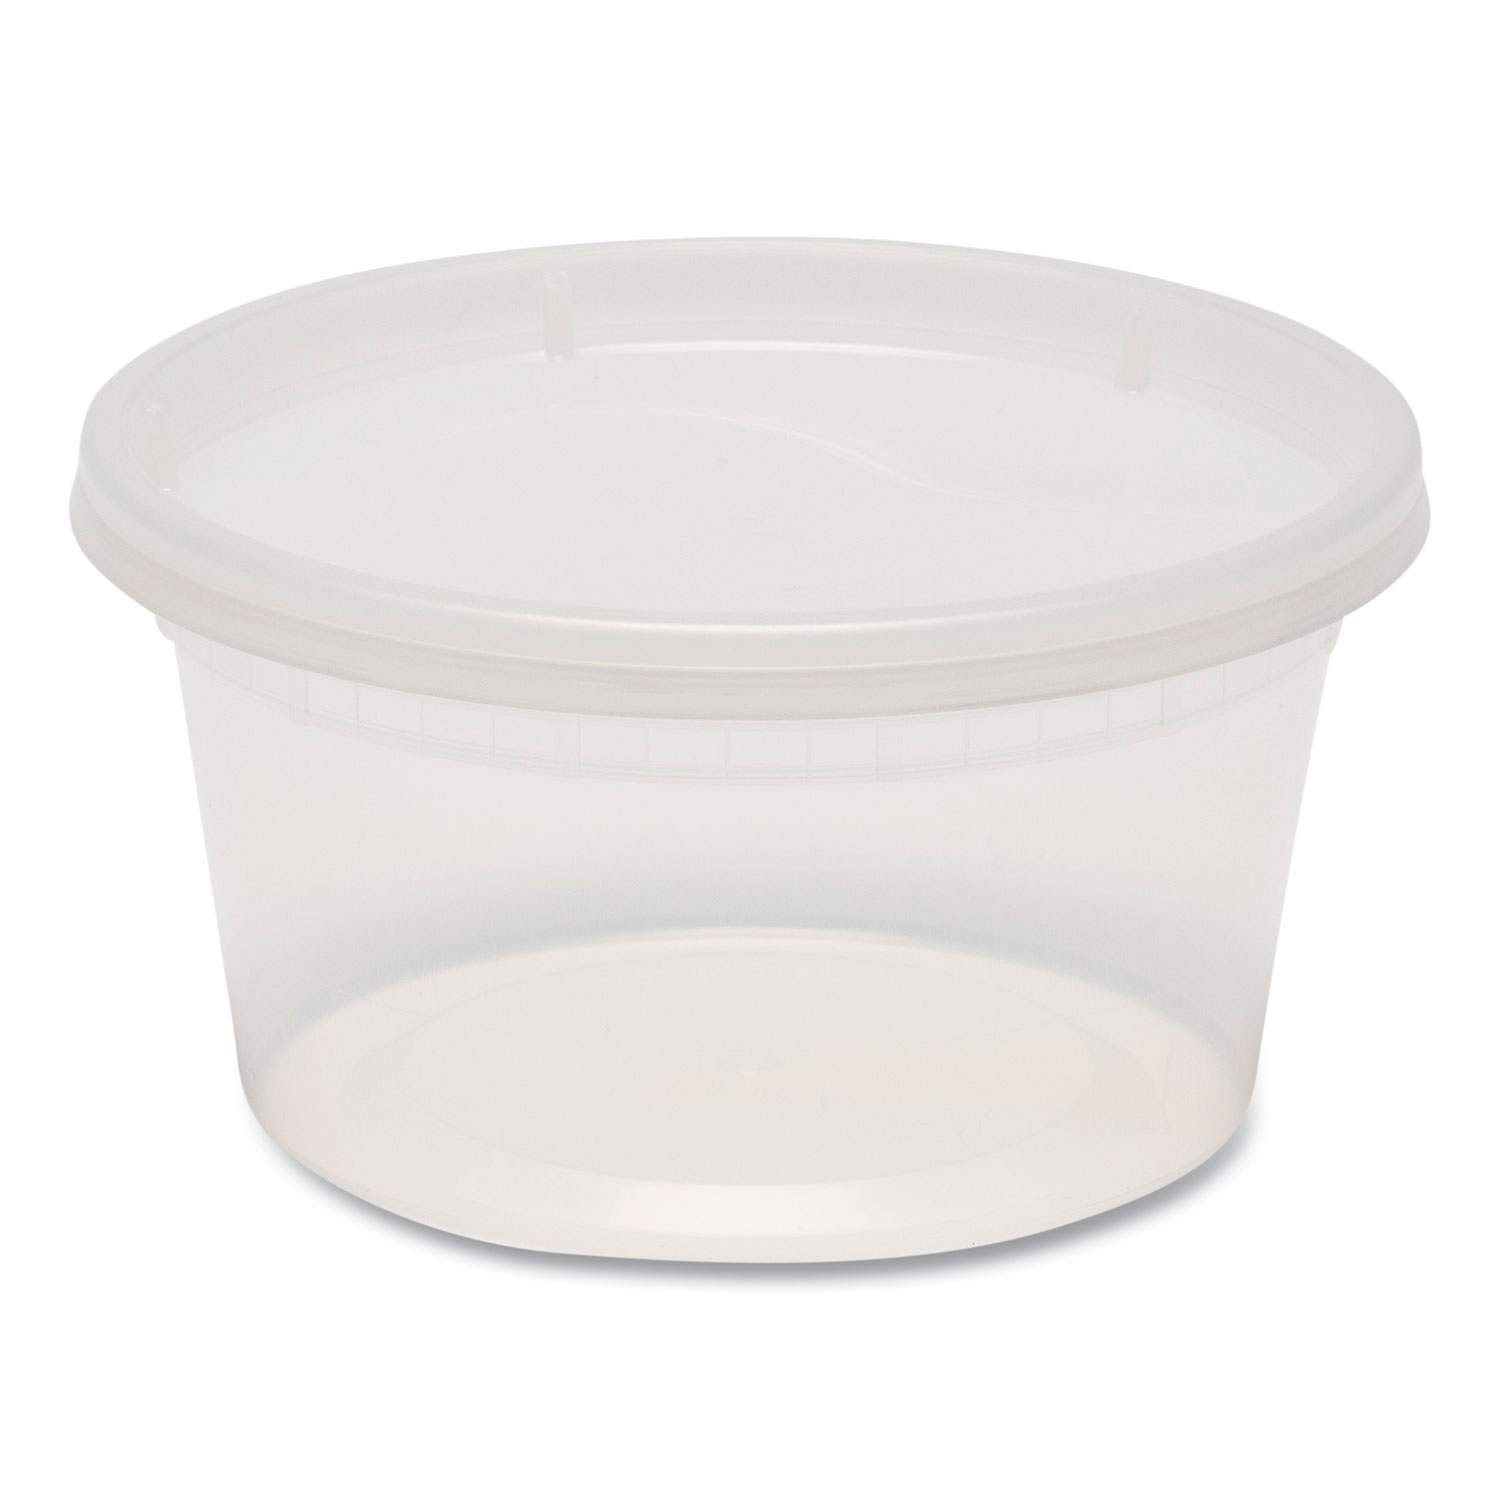 Does anyone have experience with using this type of deli container